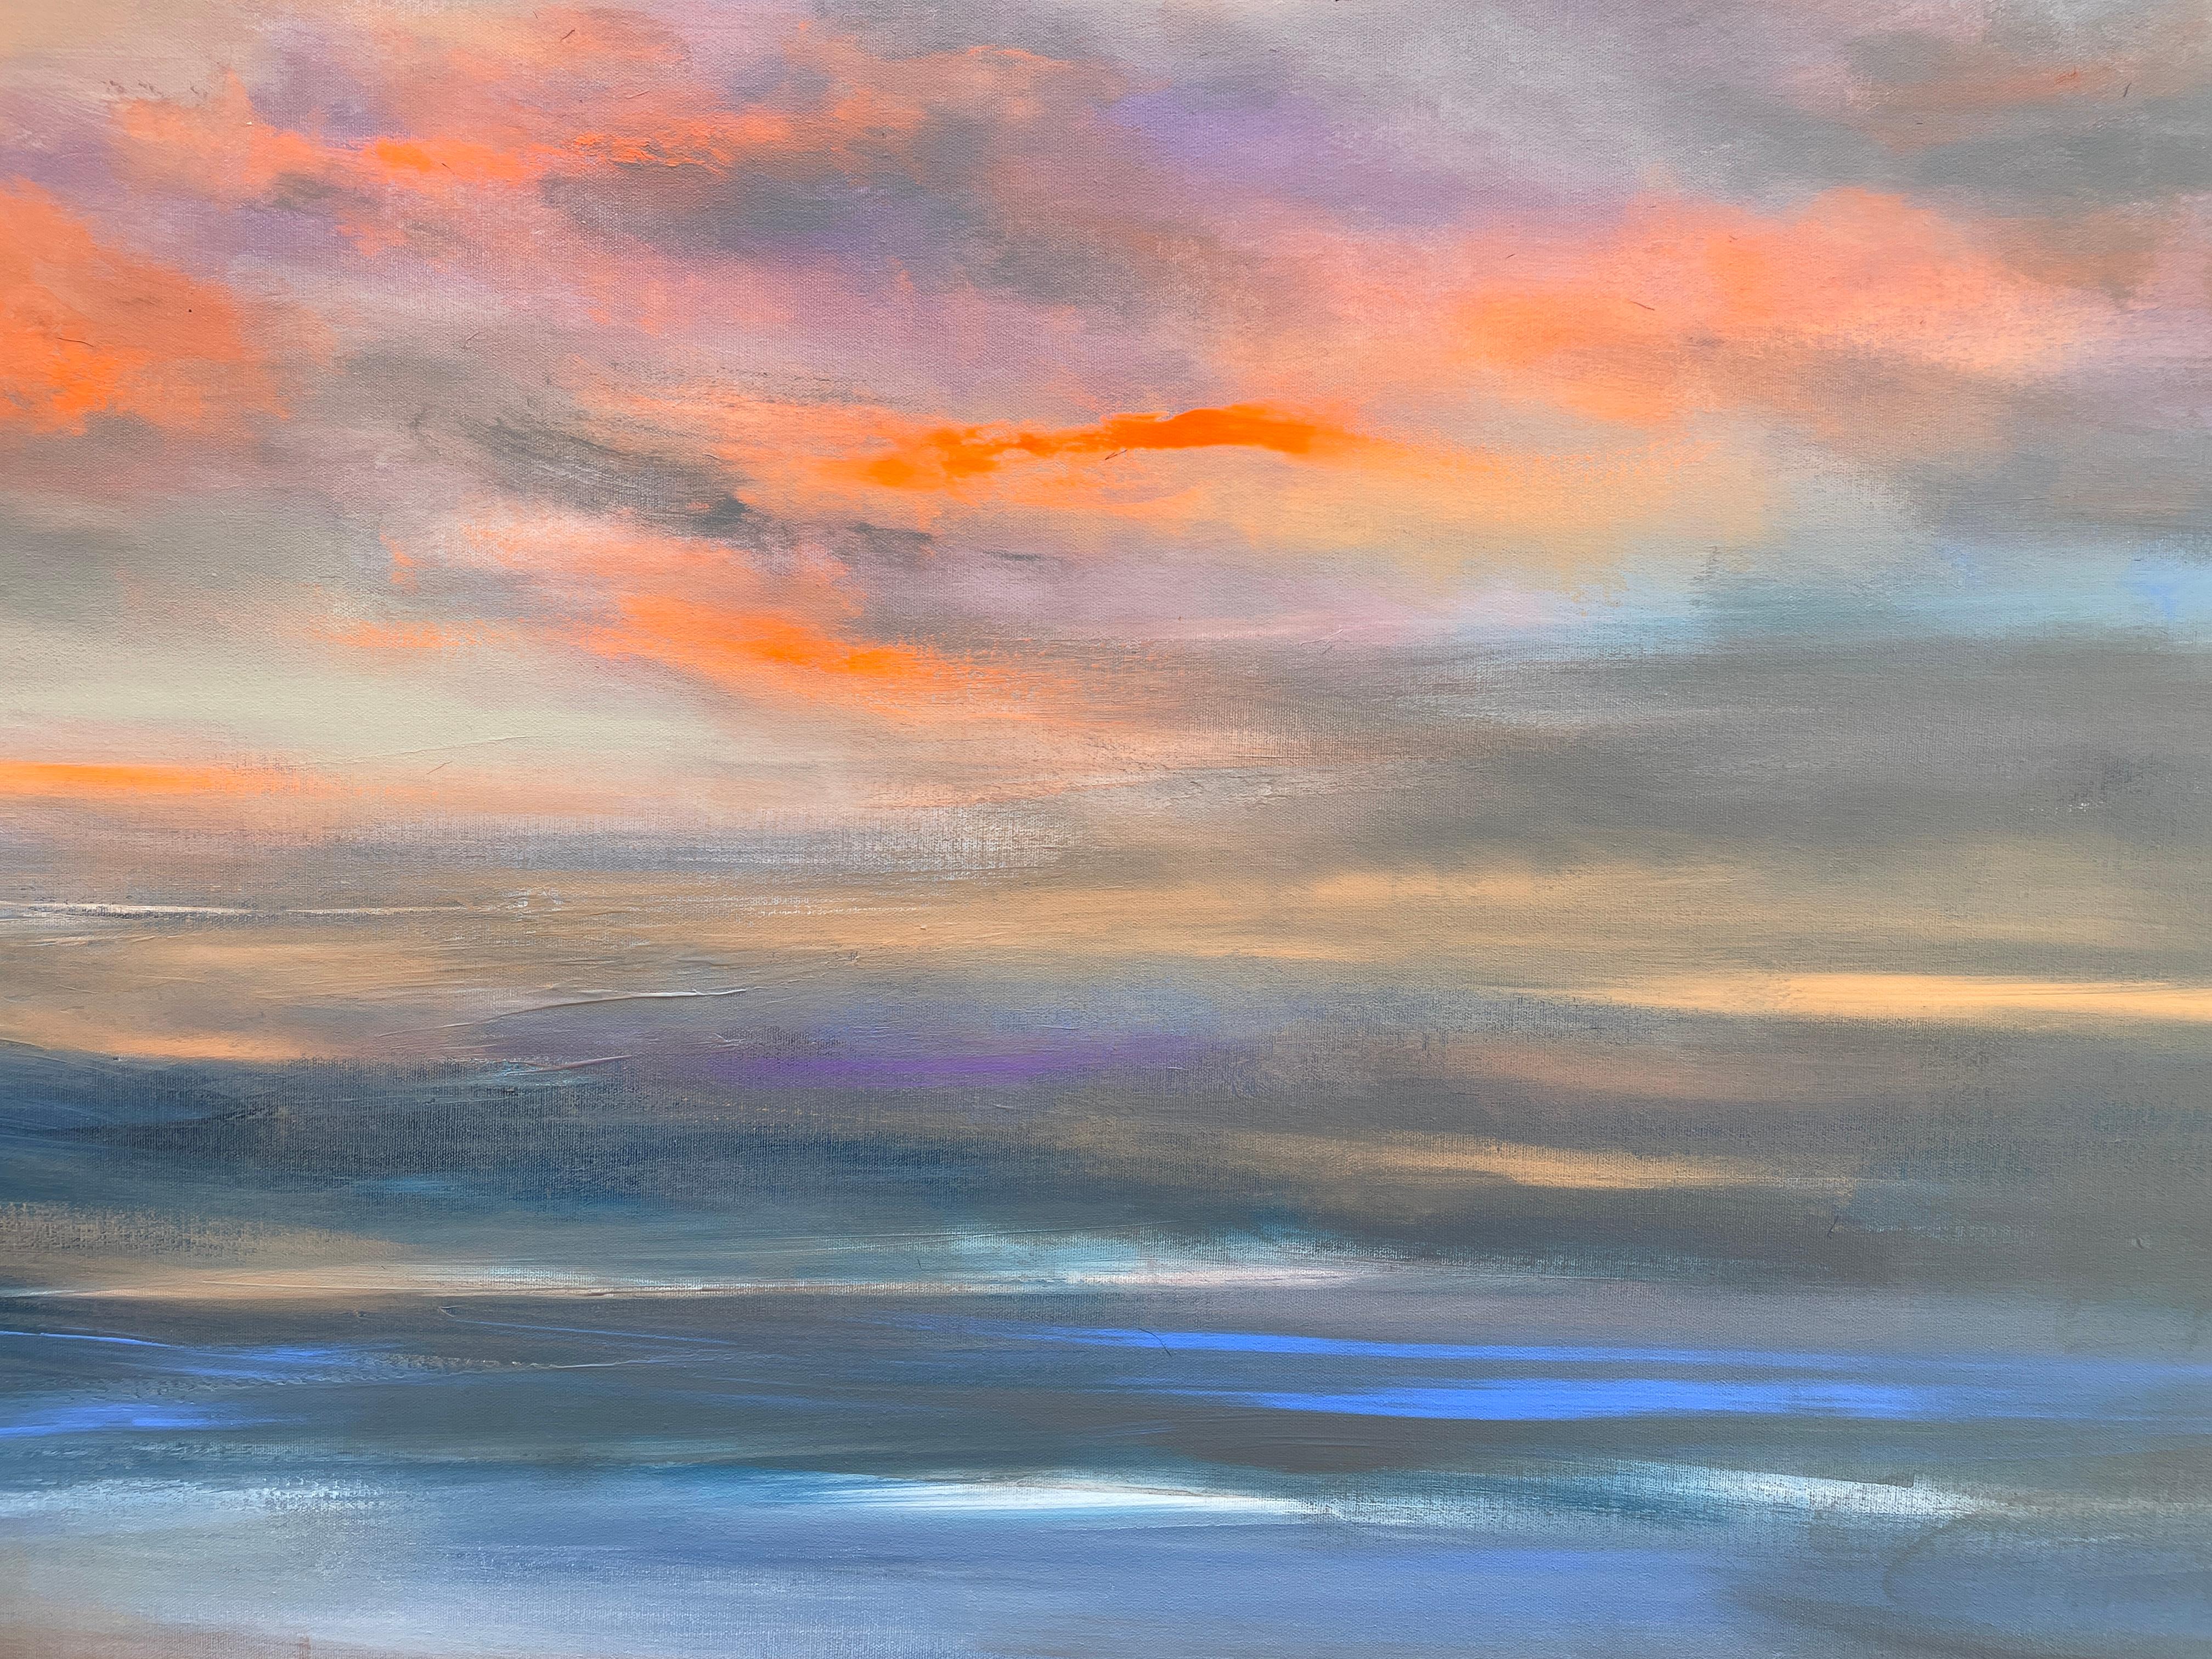 'Silence' - Sunset Over the Ocean - Large Abstract Expressionist Seascape 3